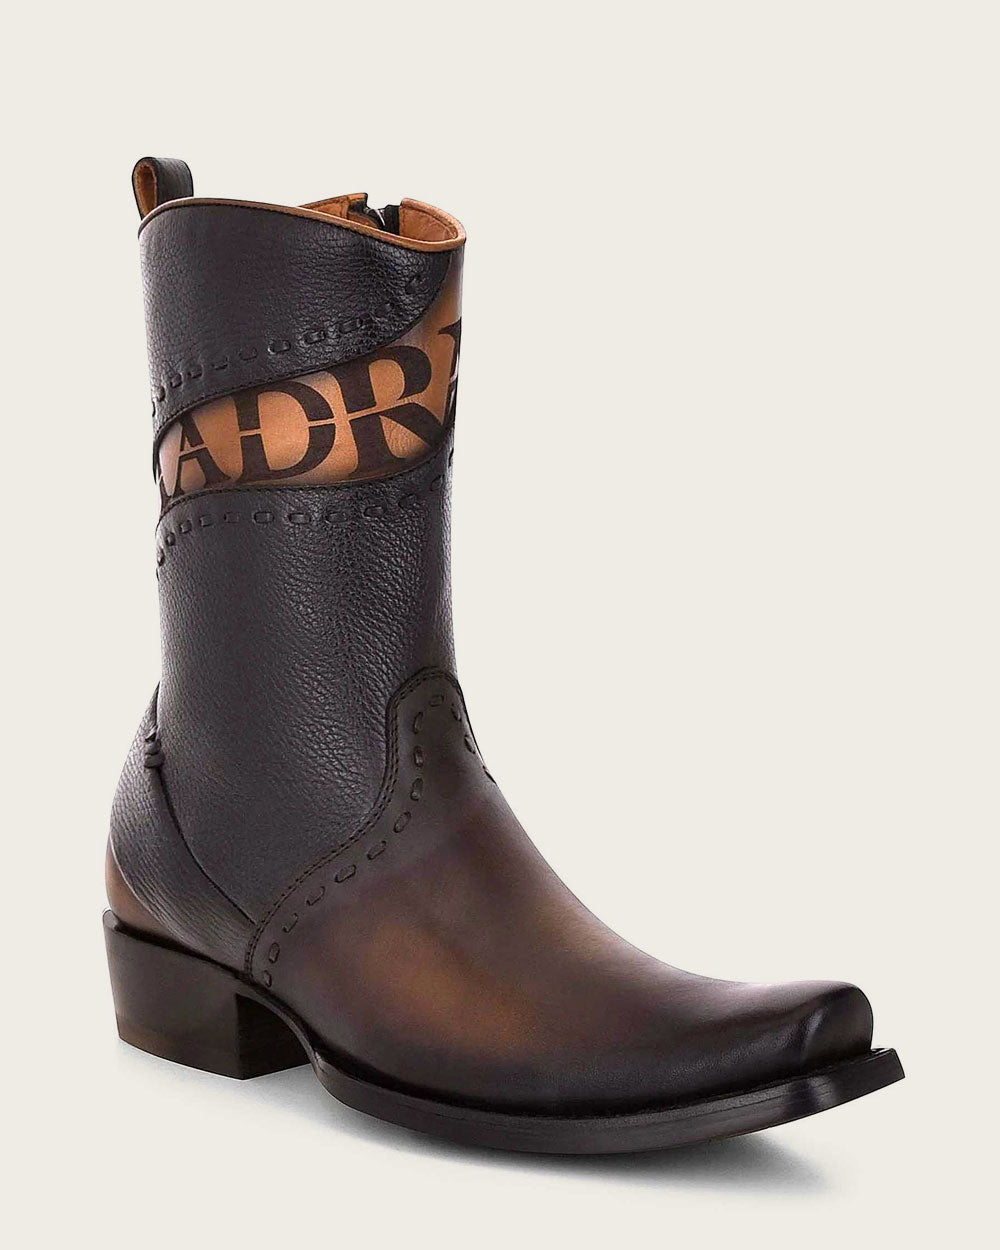 en's Brown Leather Boots: Style, Strength & Craftmanship by Cuadra.